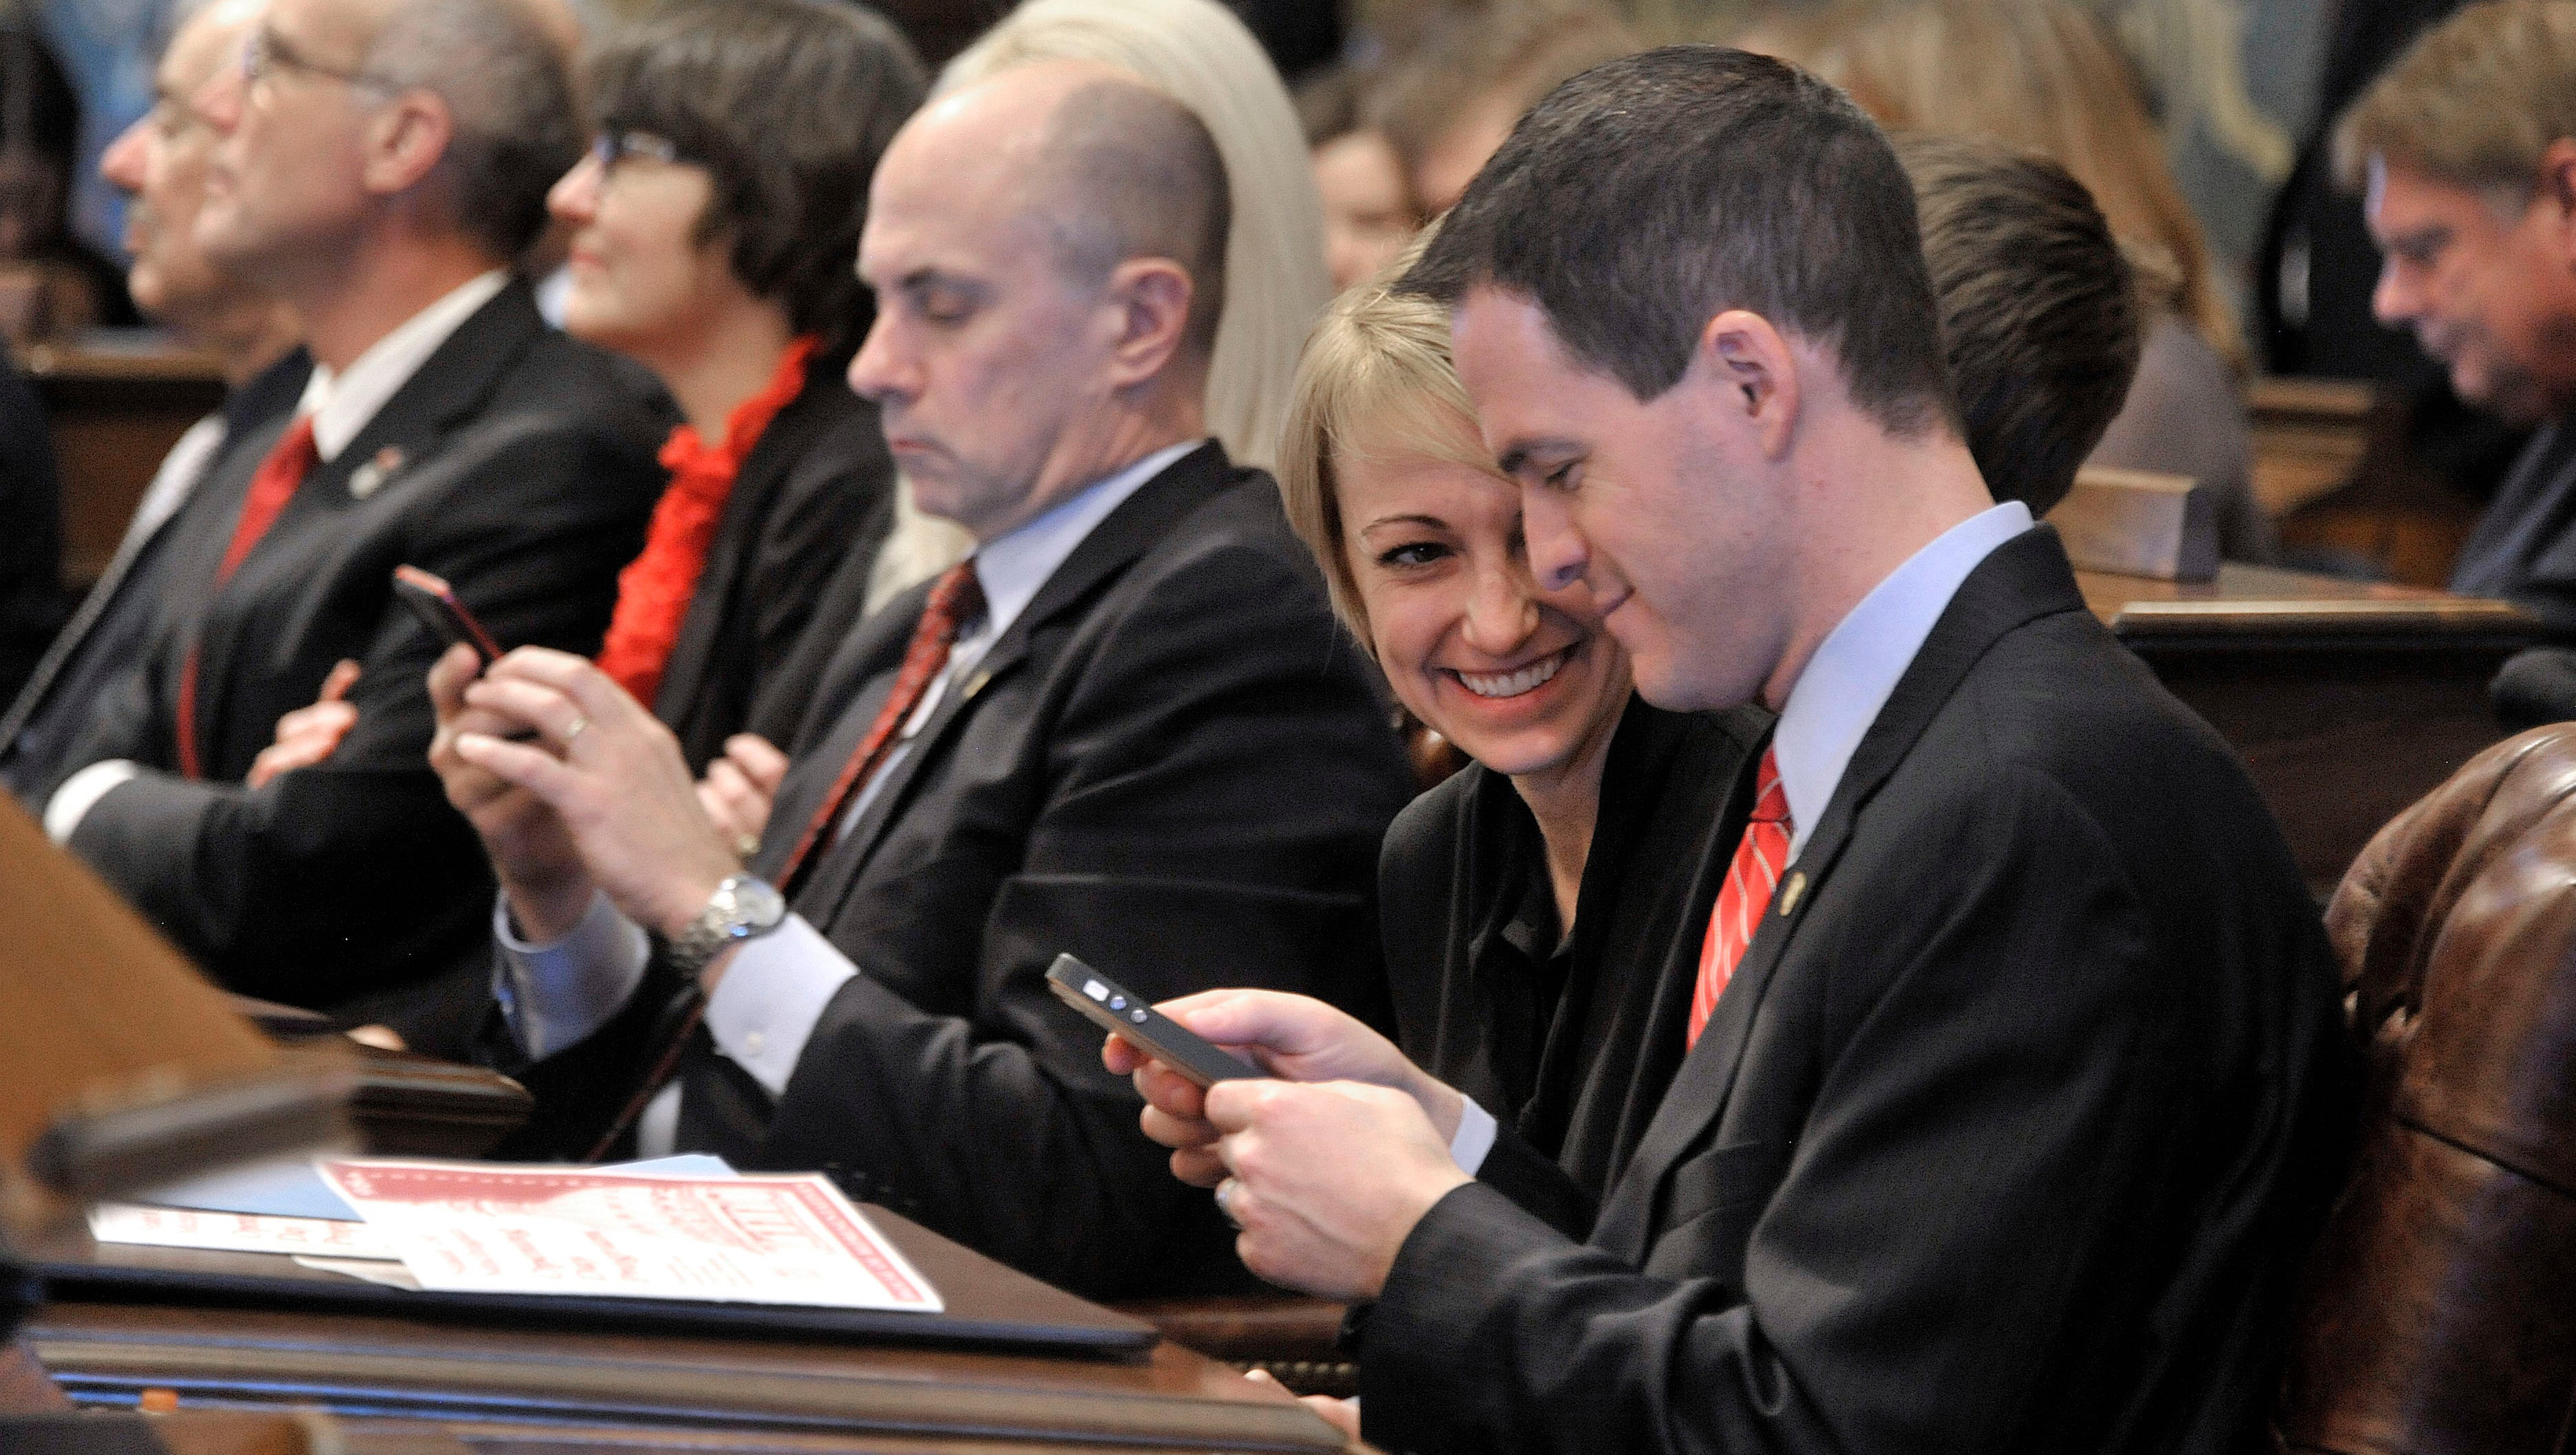 The new Speaker of the House, Kevin Cotter, R-Mount Pleasant, shares a chuckle with his wife, Jennifer, after all the seats were selected. Rep. Gary Glenn, R-Midland, uses his phone in the background.